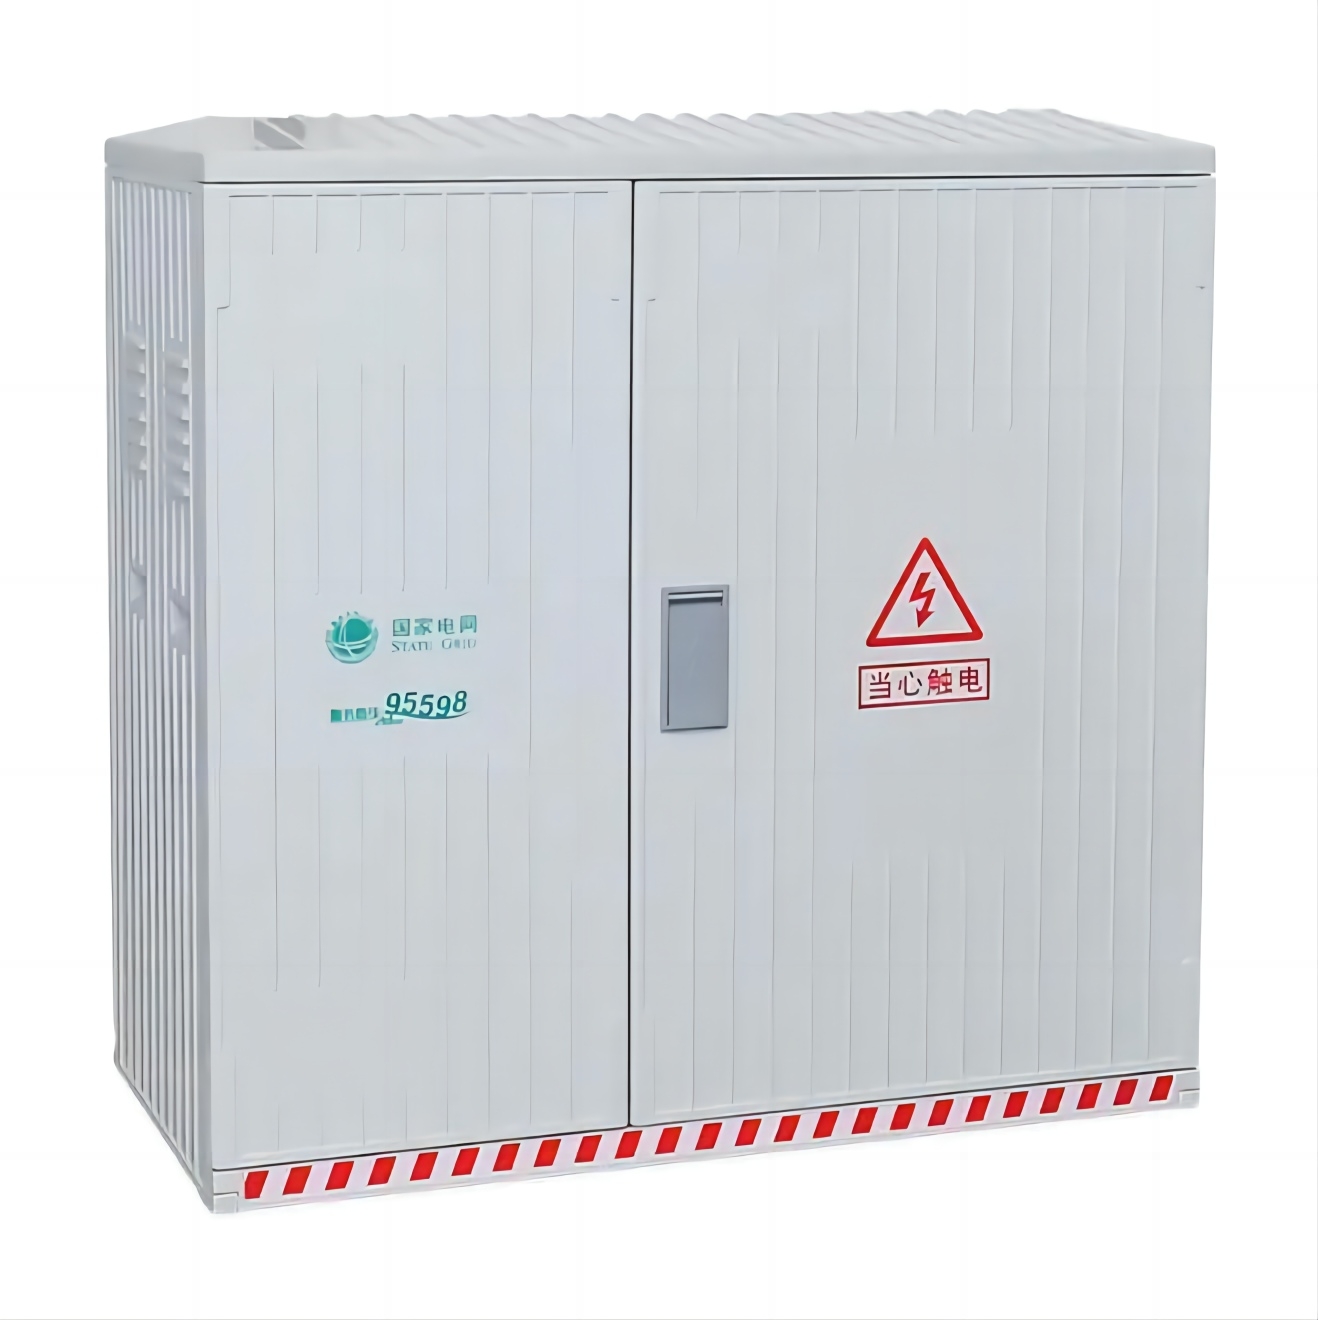 SMC 3800V 100-1000A FRP low-voltage integrated intelligent comprehensive cable distribution box: reliable power distribution for industrial and civil buildings